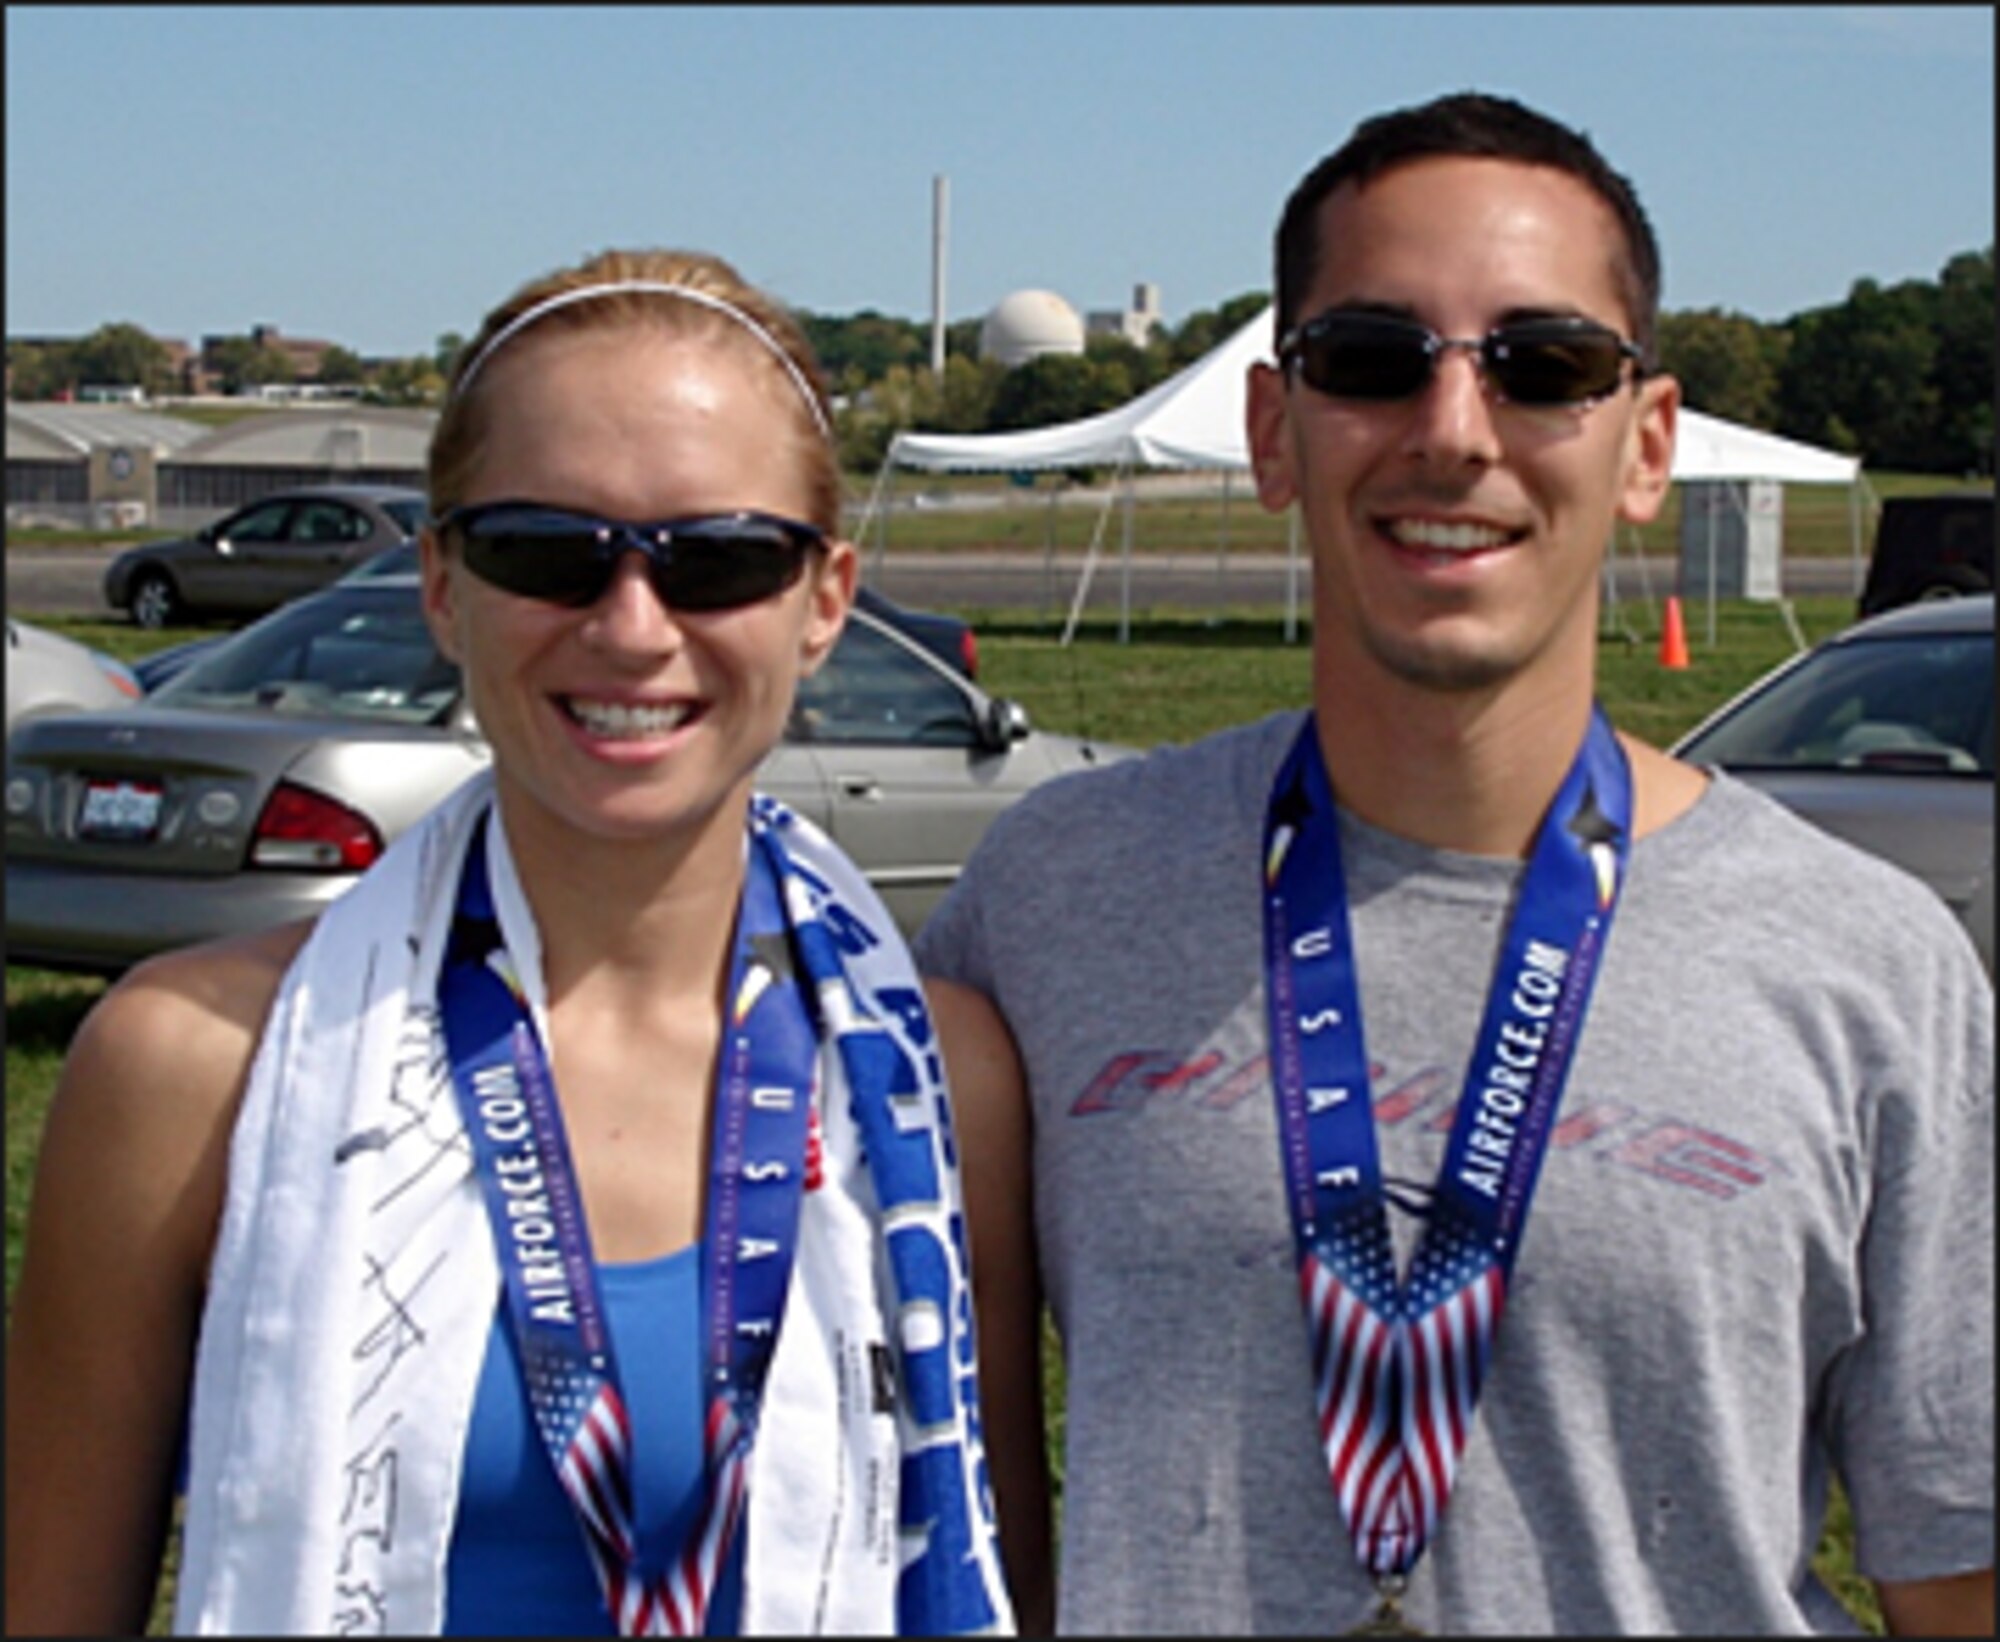 Capts. Tara Erlandson, left, and Anthony Cannone, both instructor pilots with the 32nd Flying Training Squadron at Vance AFB, Okla., completed the U.S. Air Force half-marathon Sept. 19 at Wright-Patterson Air Force Base, Ohio. (Contributed photo)